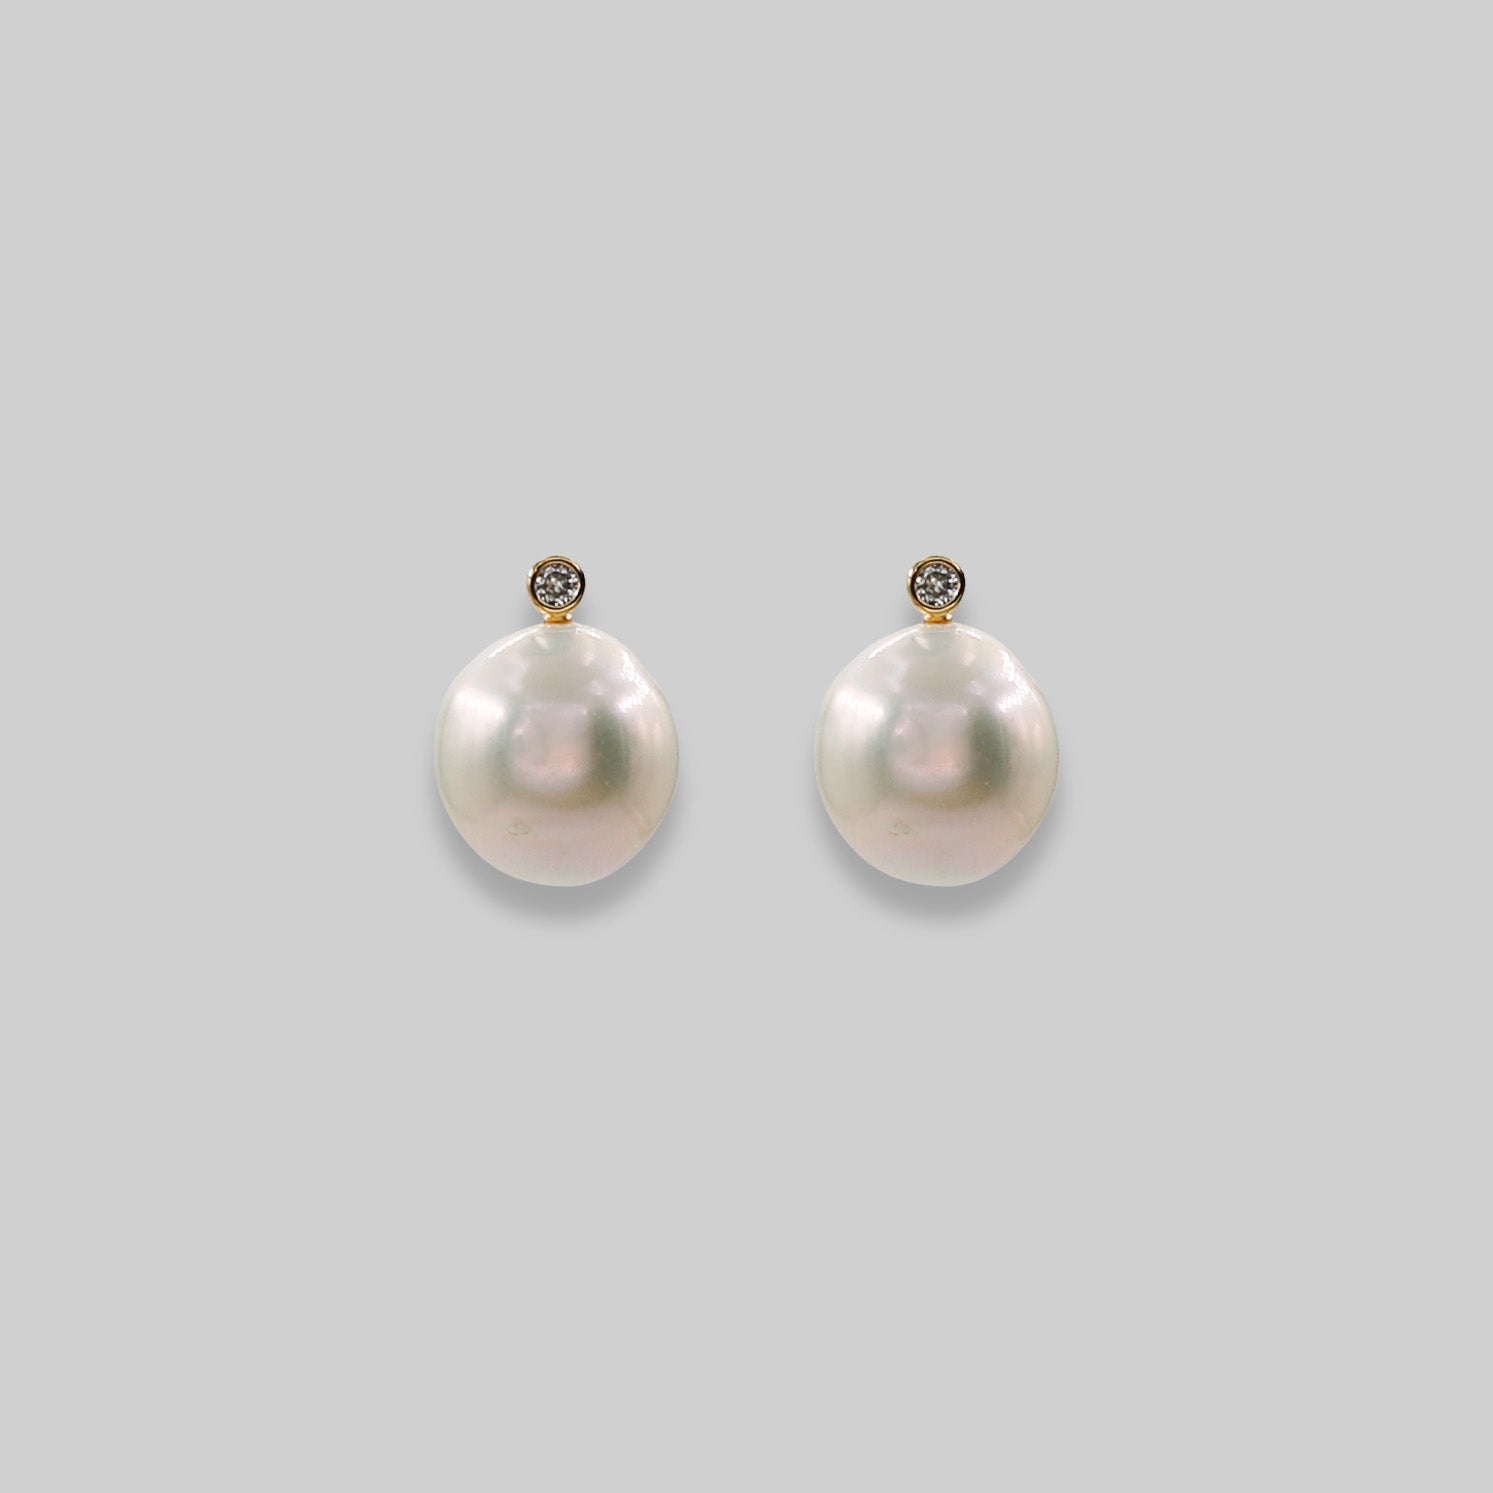 Buy Pure Freshwater Pearl Earrings for Girls and Women